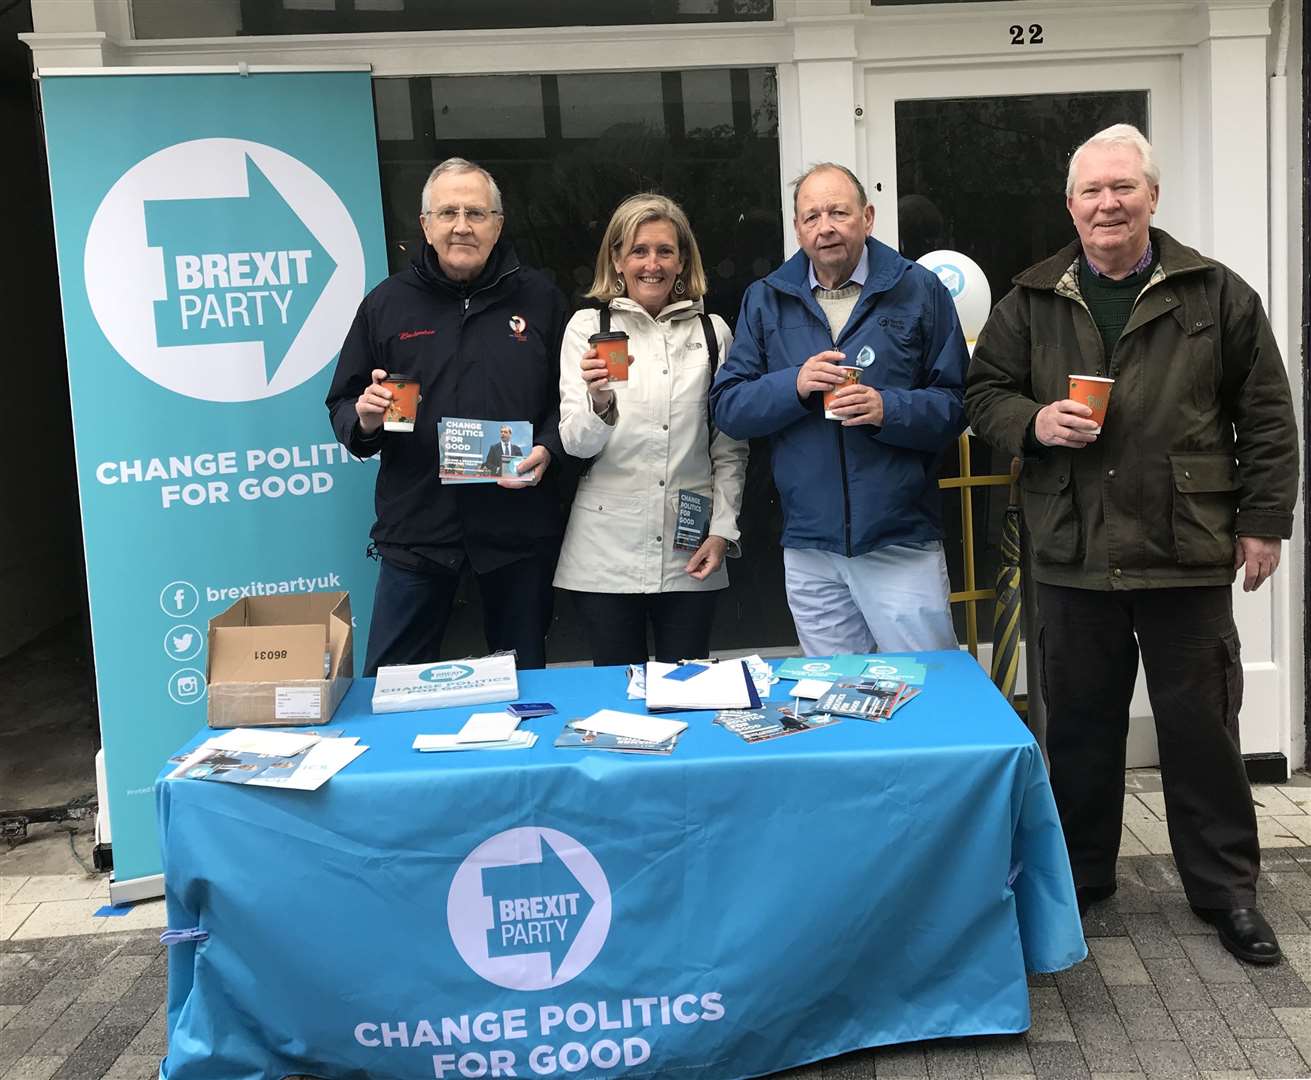 The Brexit campaigners in Maidstone's Week Street, from left: Mike Wardle, Pam Watts, Jeff Wimborne and Robert Pettit